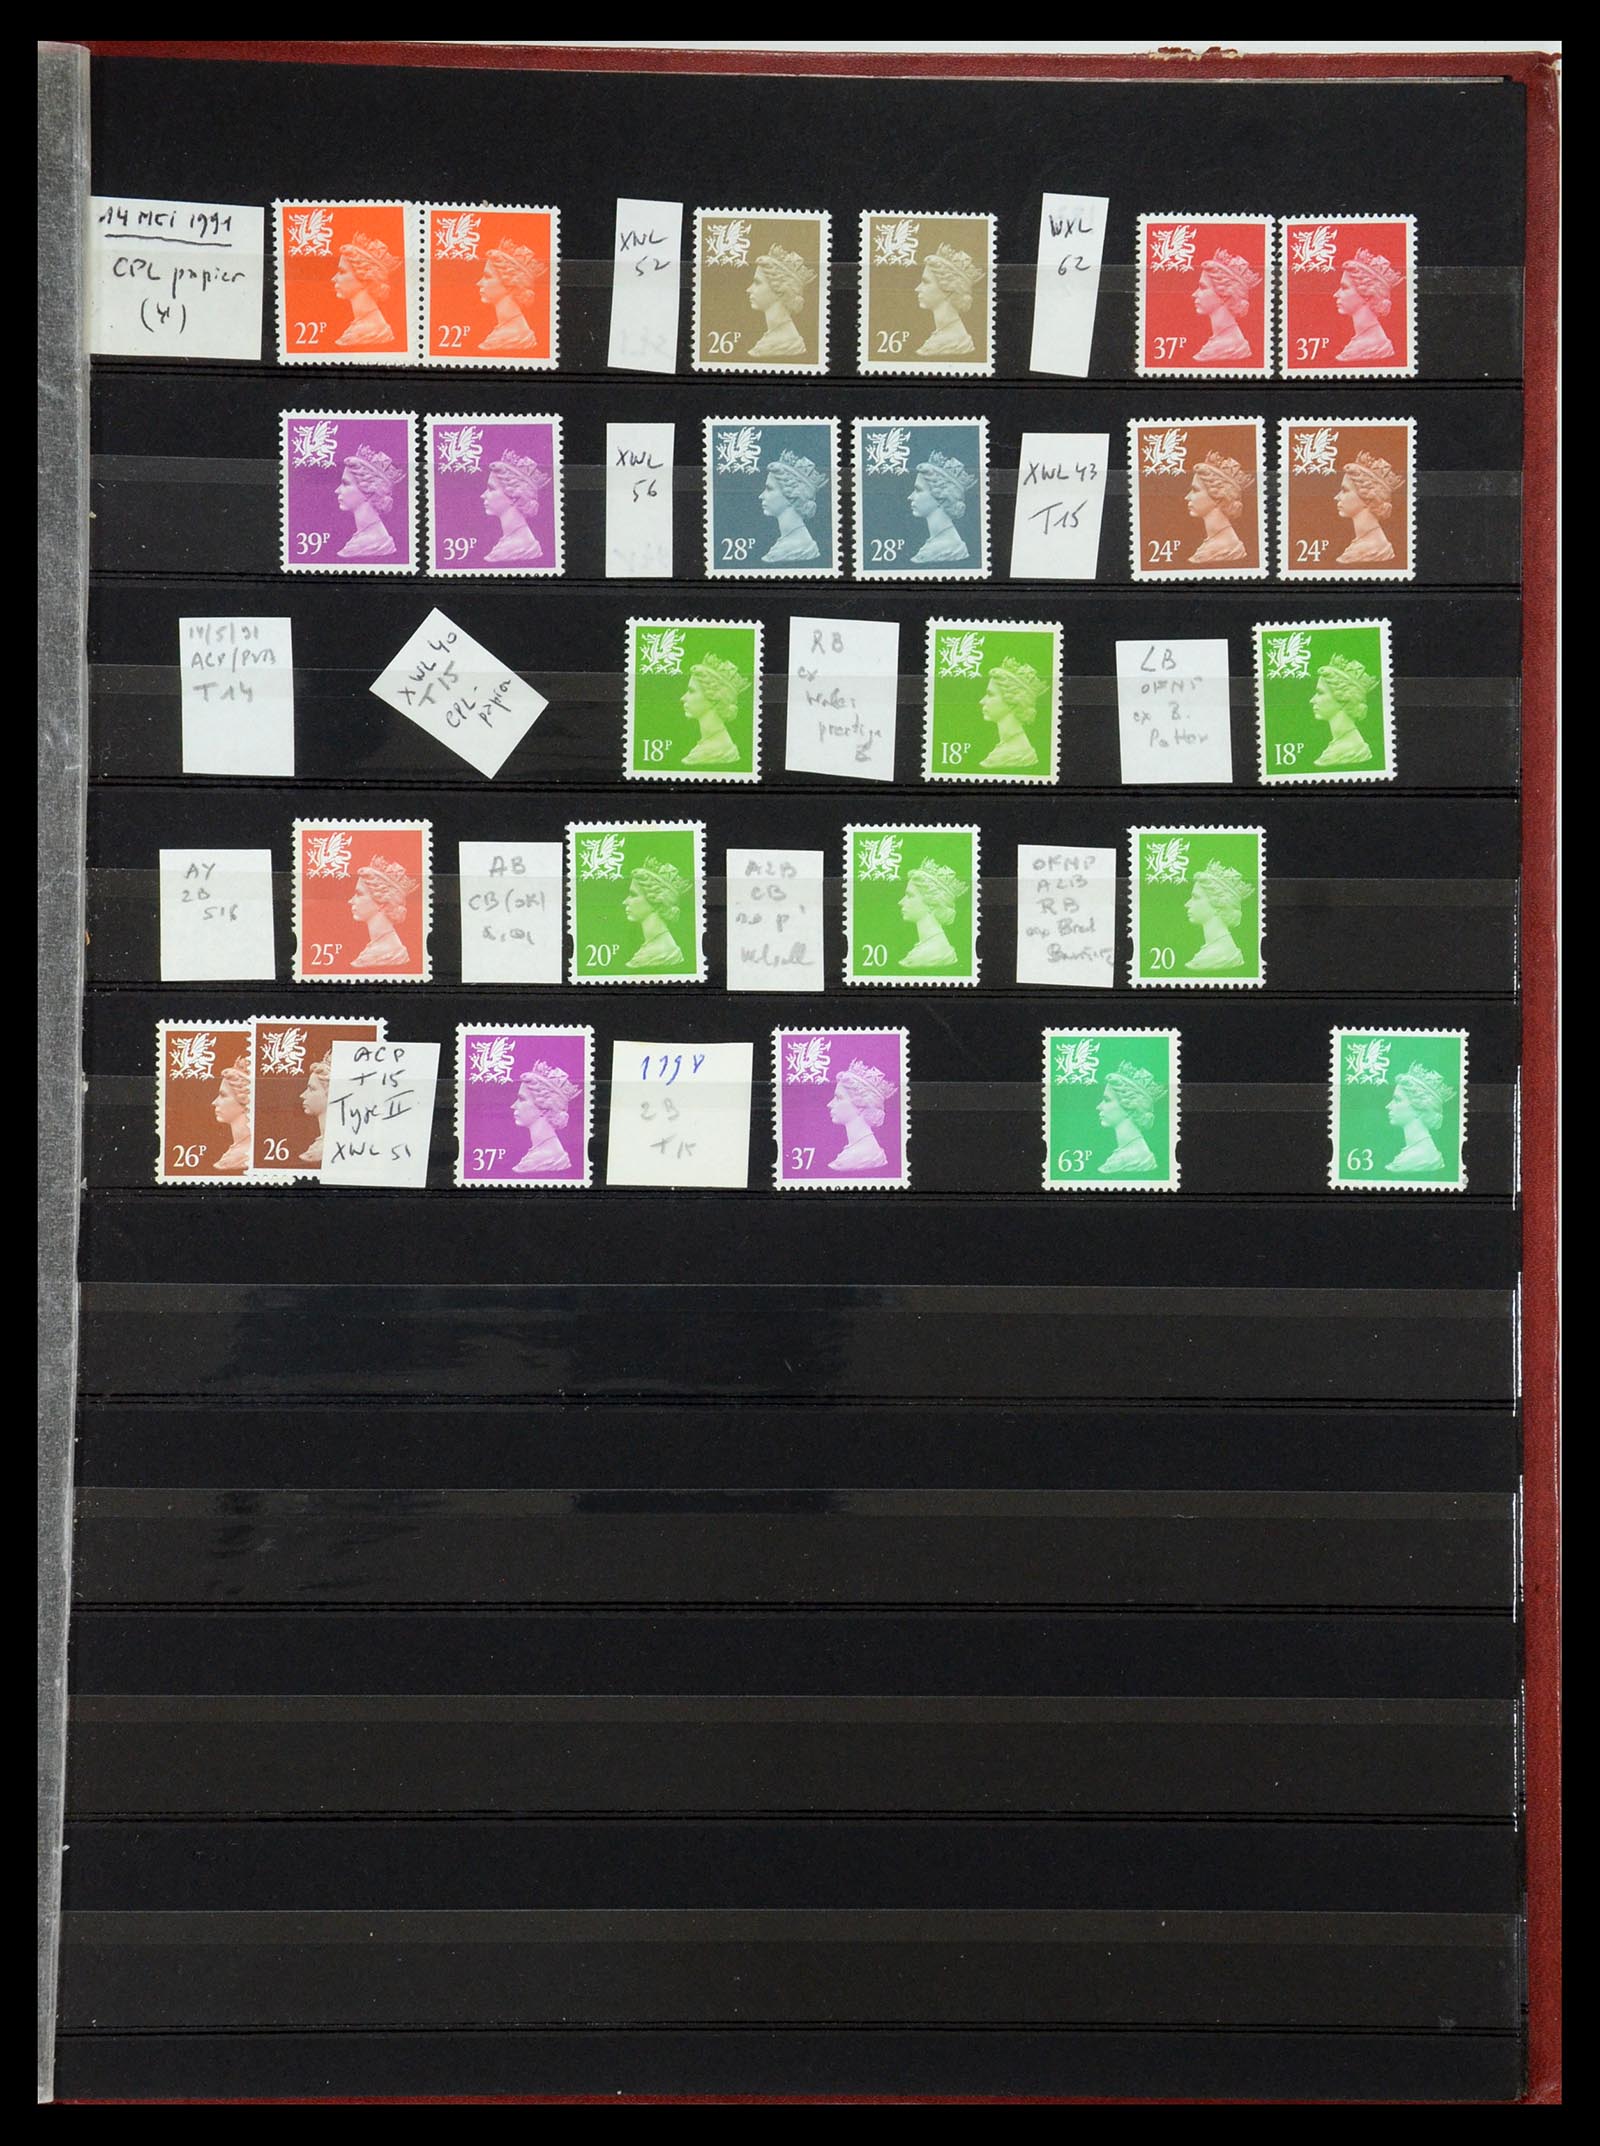 35700 771 - Stamp Collection 35700 Great Britain machins 1971-2018!!